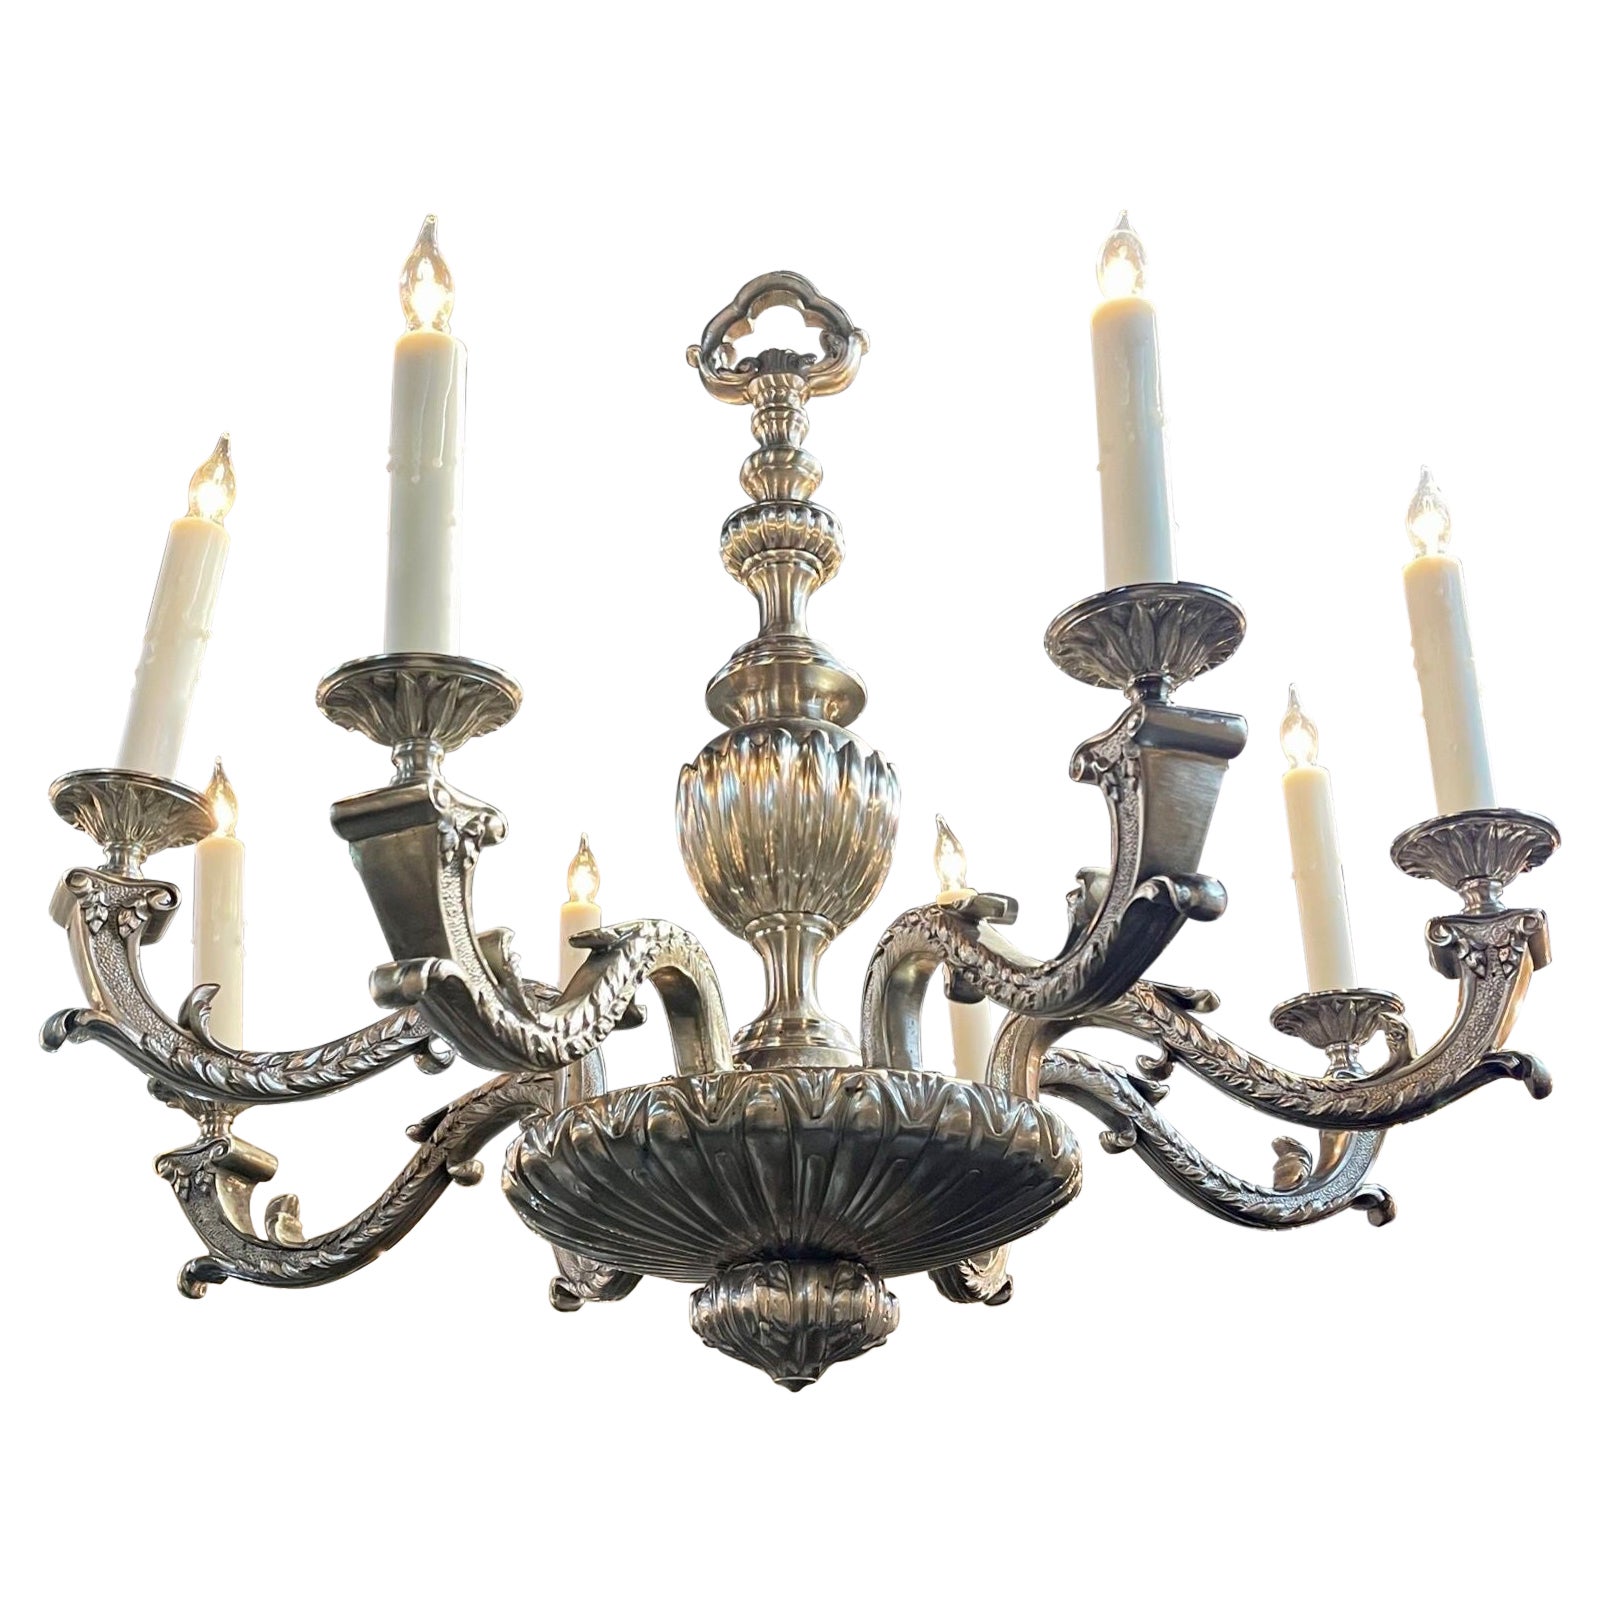 19th Century English Silvered Bronze Chandelier with 8 Lights